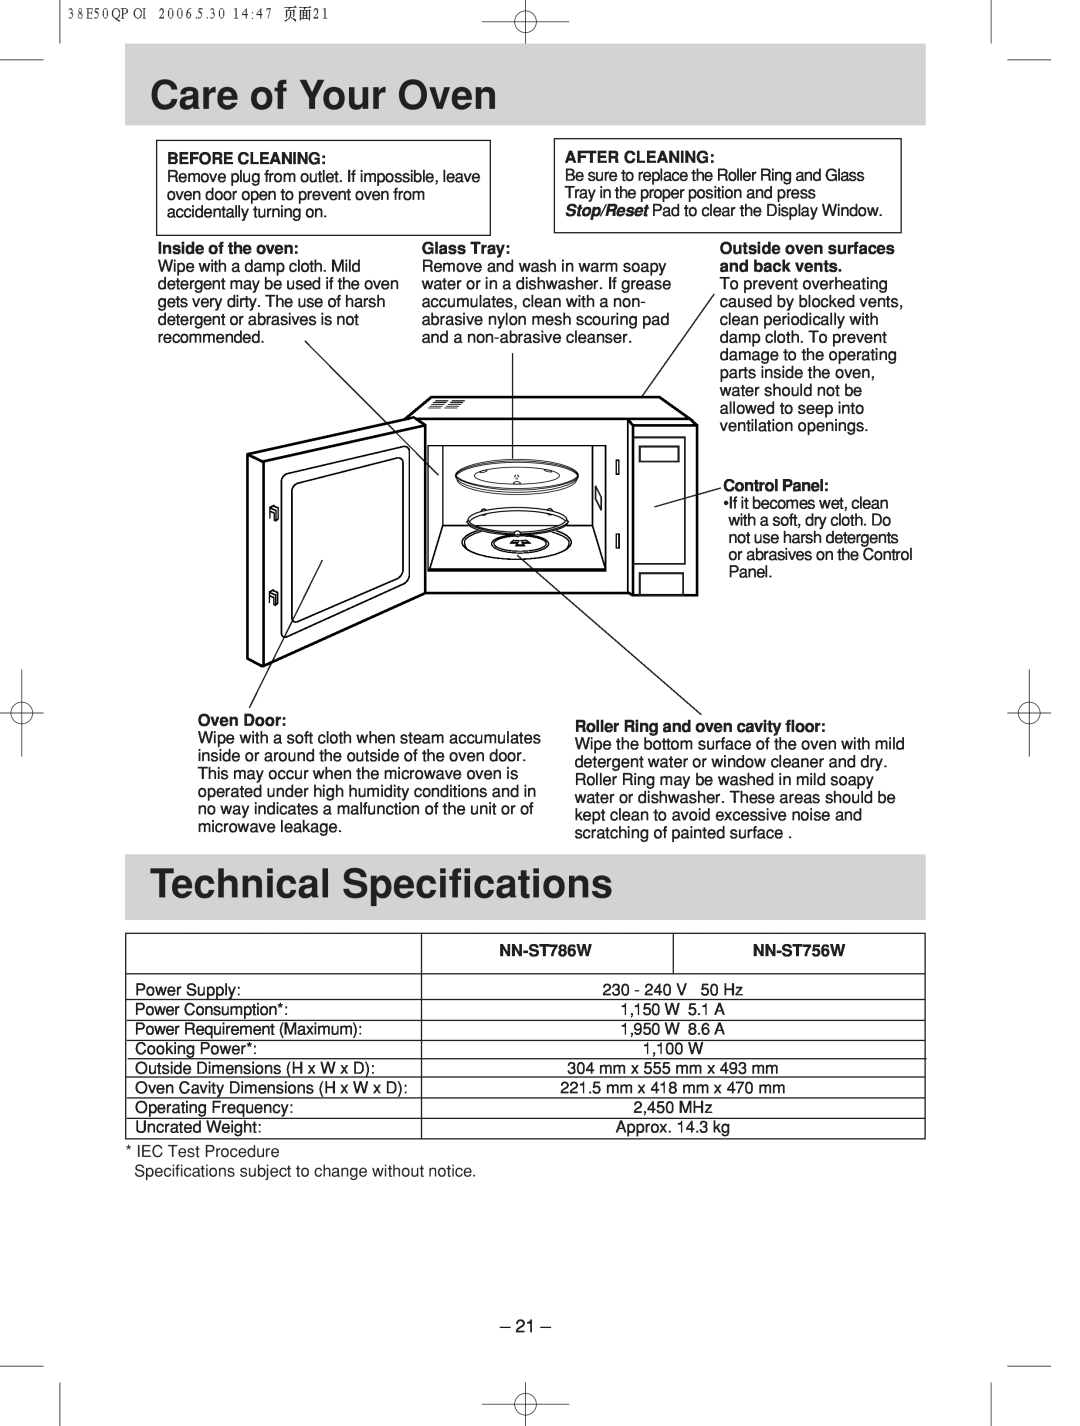 Panasonic NN-ST756W manual Care!!! of Your! Oven, Technical Specifications 